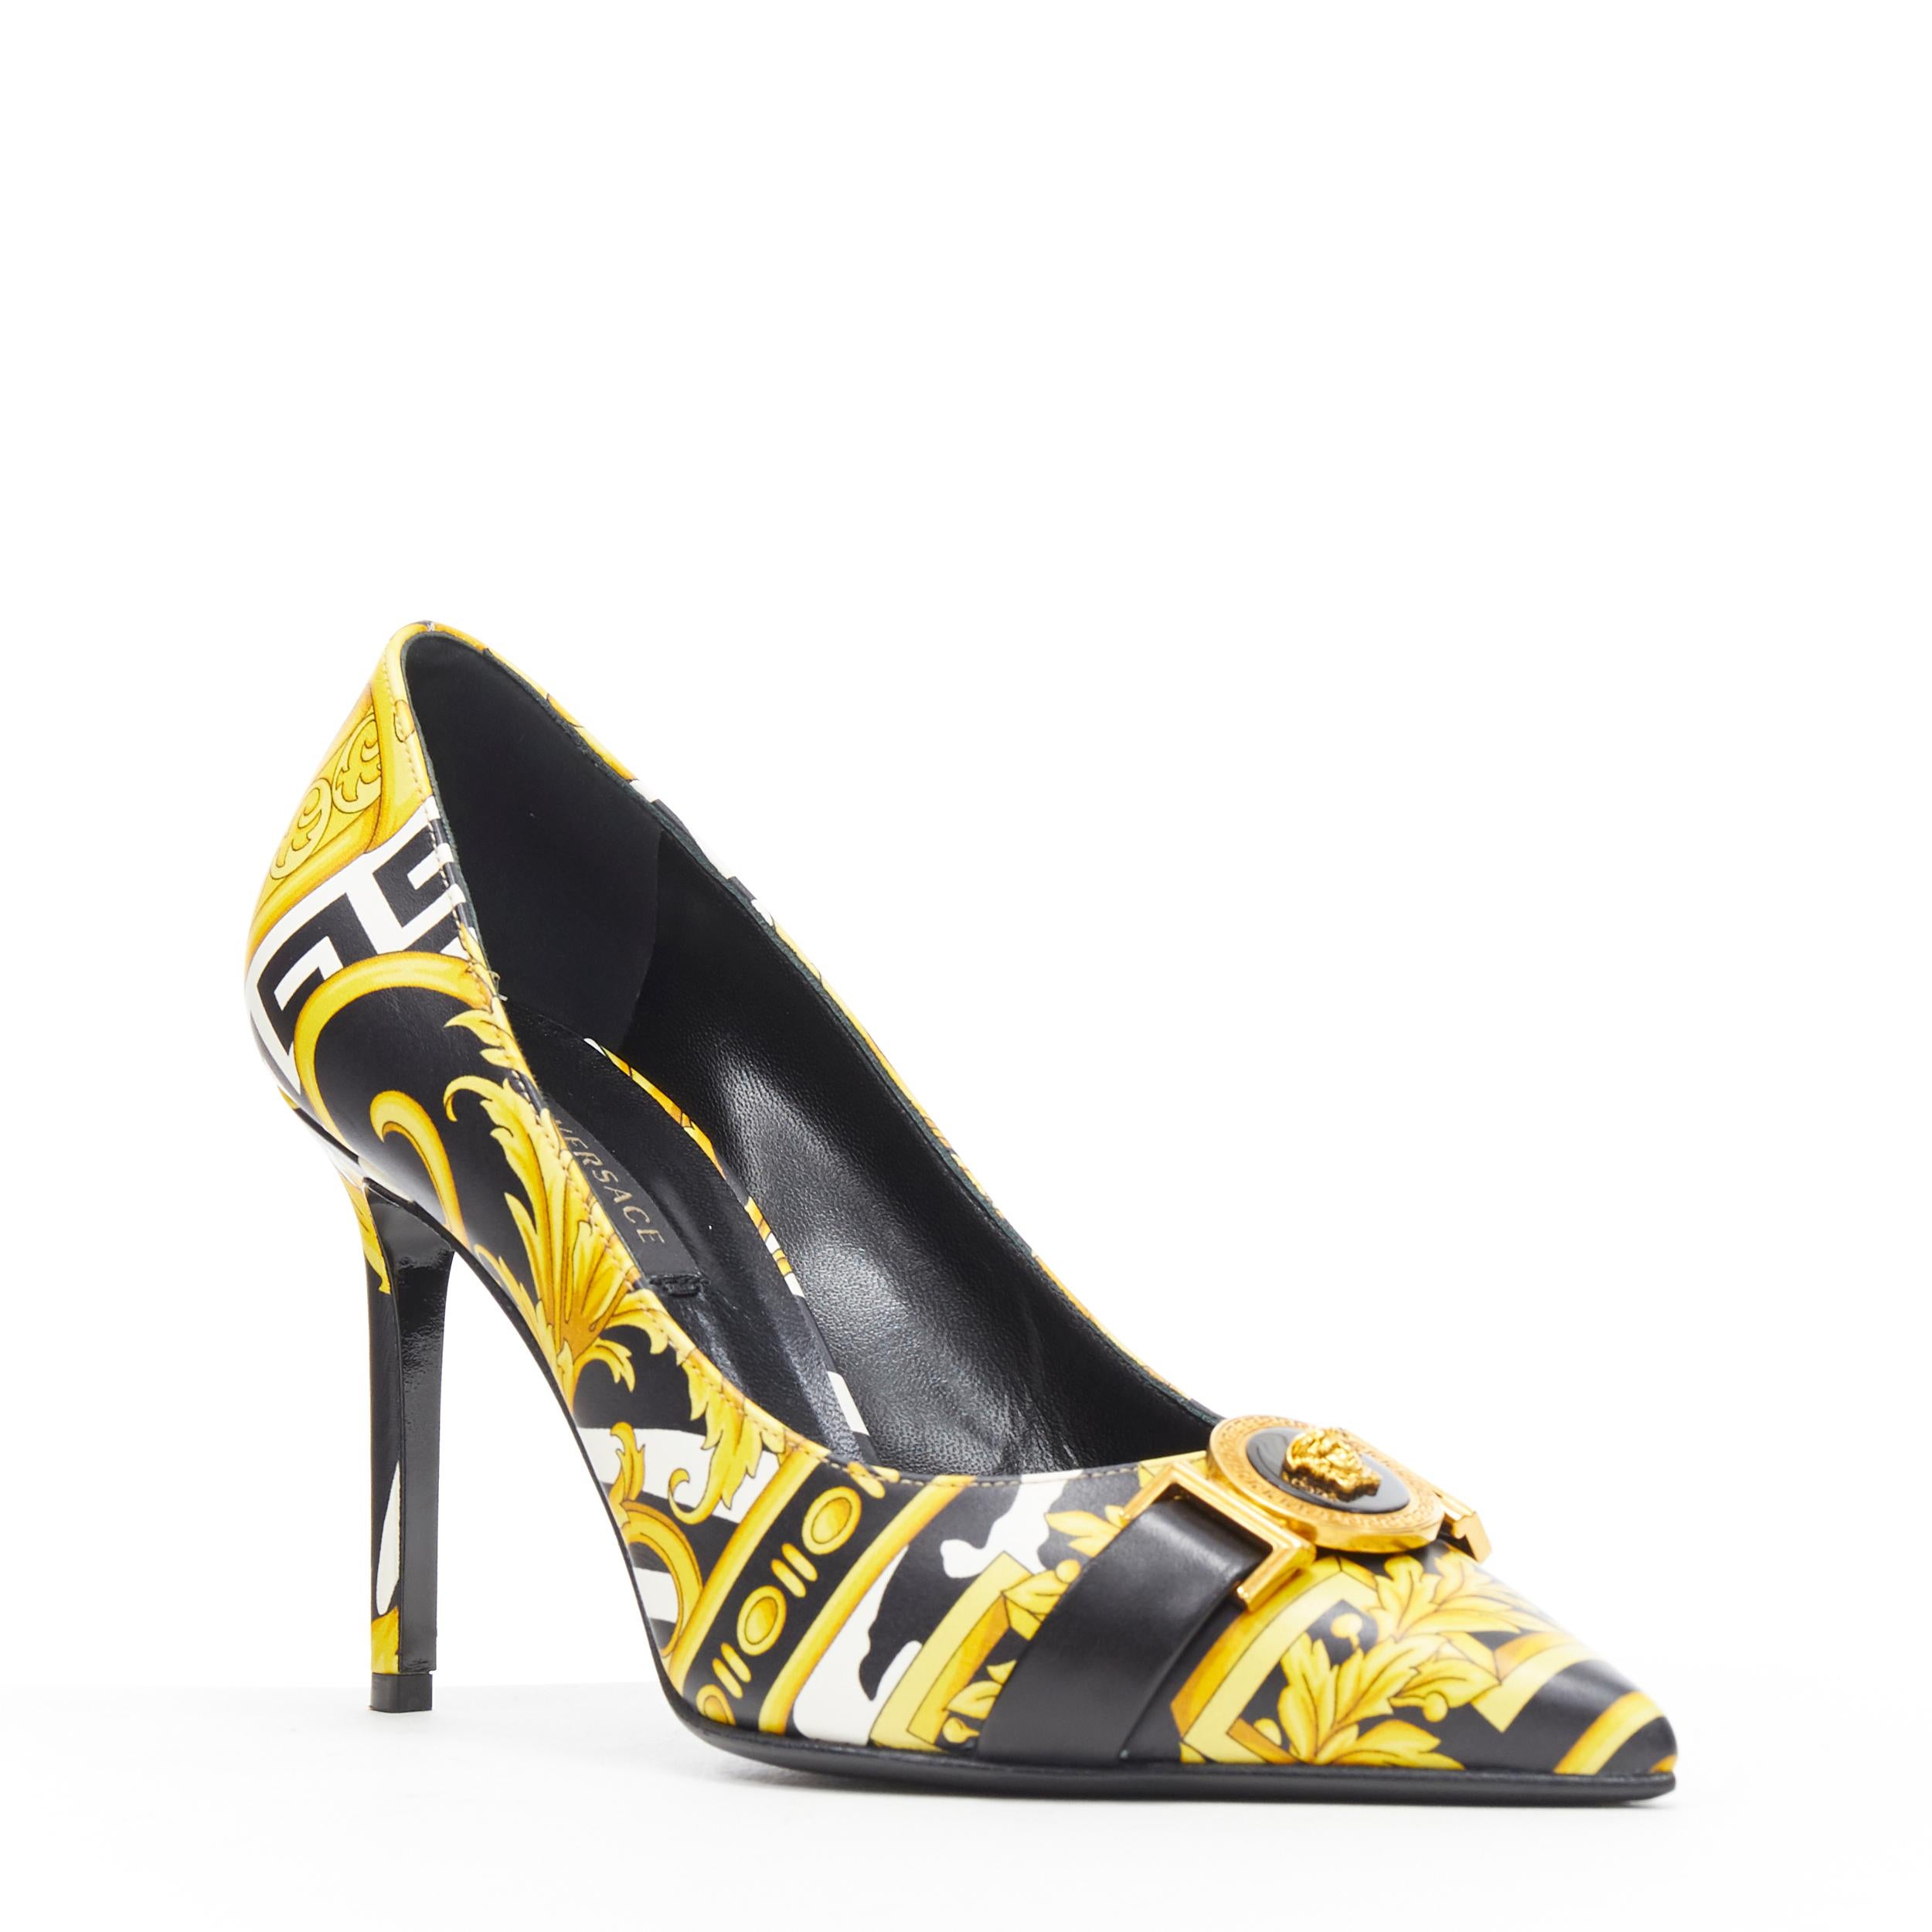 new VERSACE Savage Barocco gold black white Medusa  pointy leather heel EU38
Brand: Versace
Designer: Donatella Versace
Collection: 2019
Model Name / Style: Baroque pump
Material: Leather
Color: Gold, black
Pattern: Floral
Extra Detail: Savage